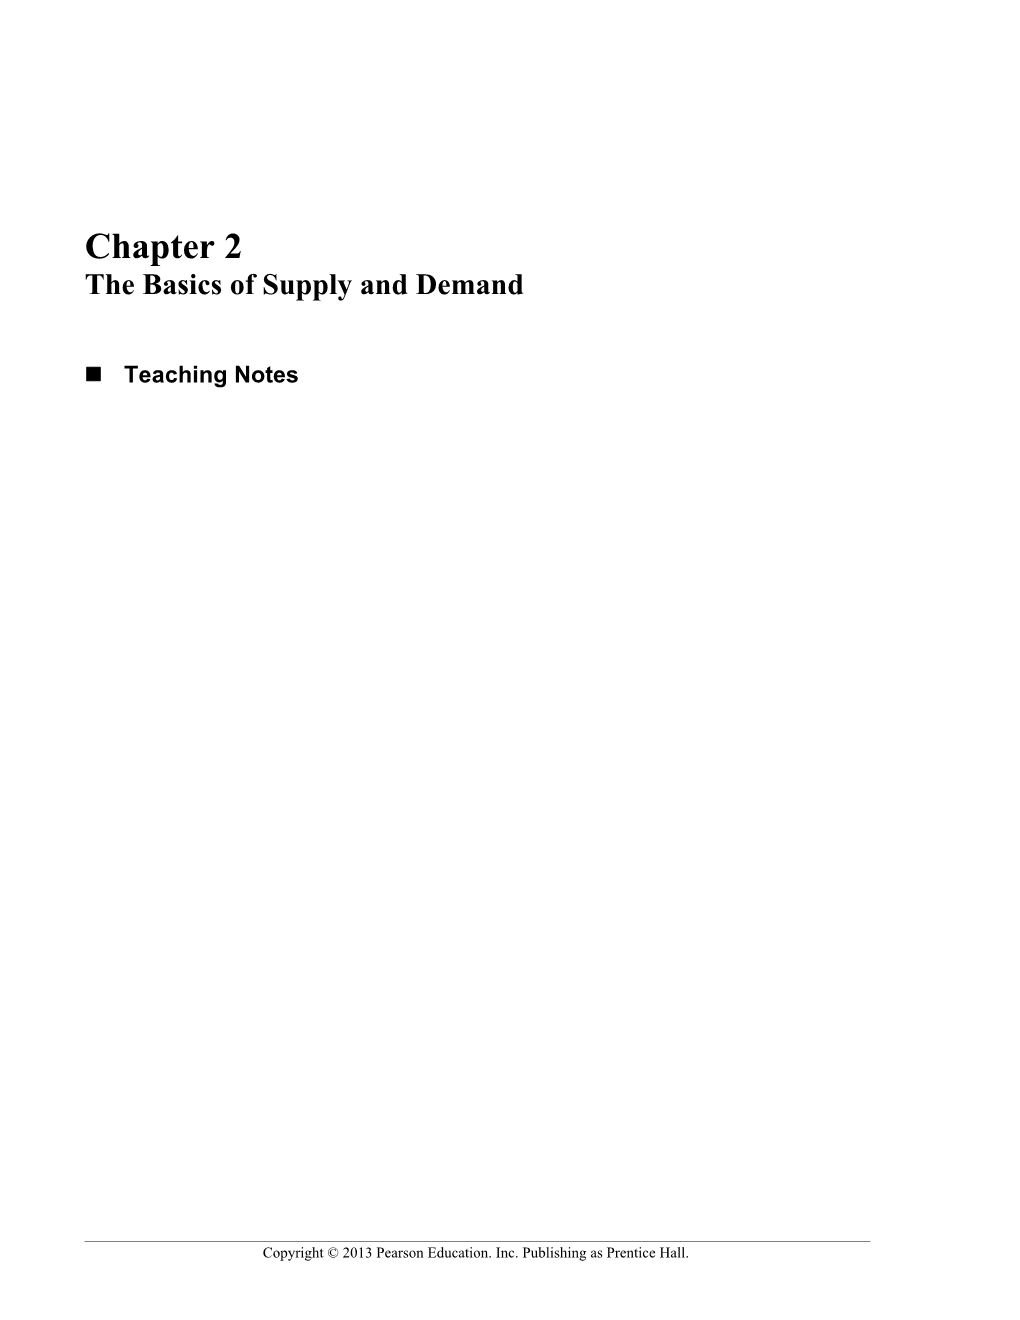 Chapter 2 the Basics of Supply and Demand